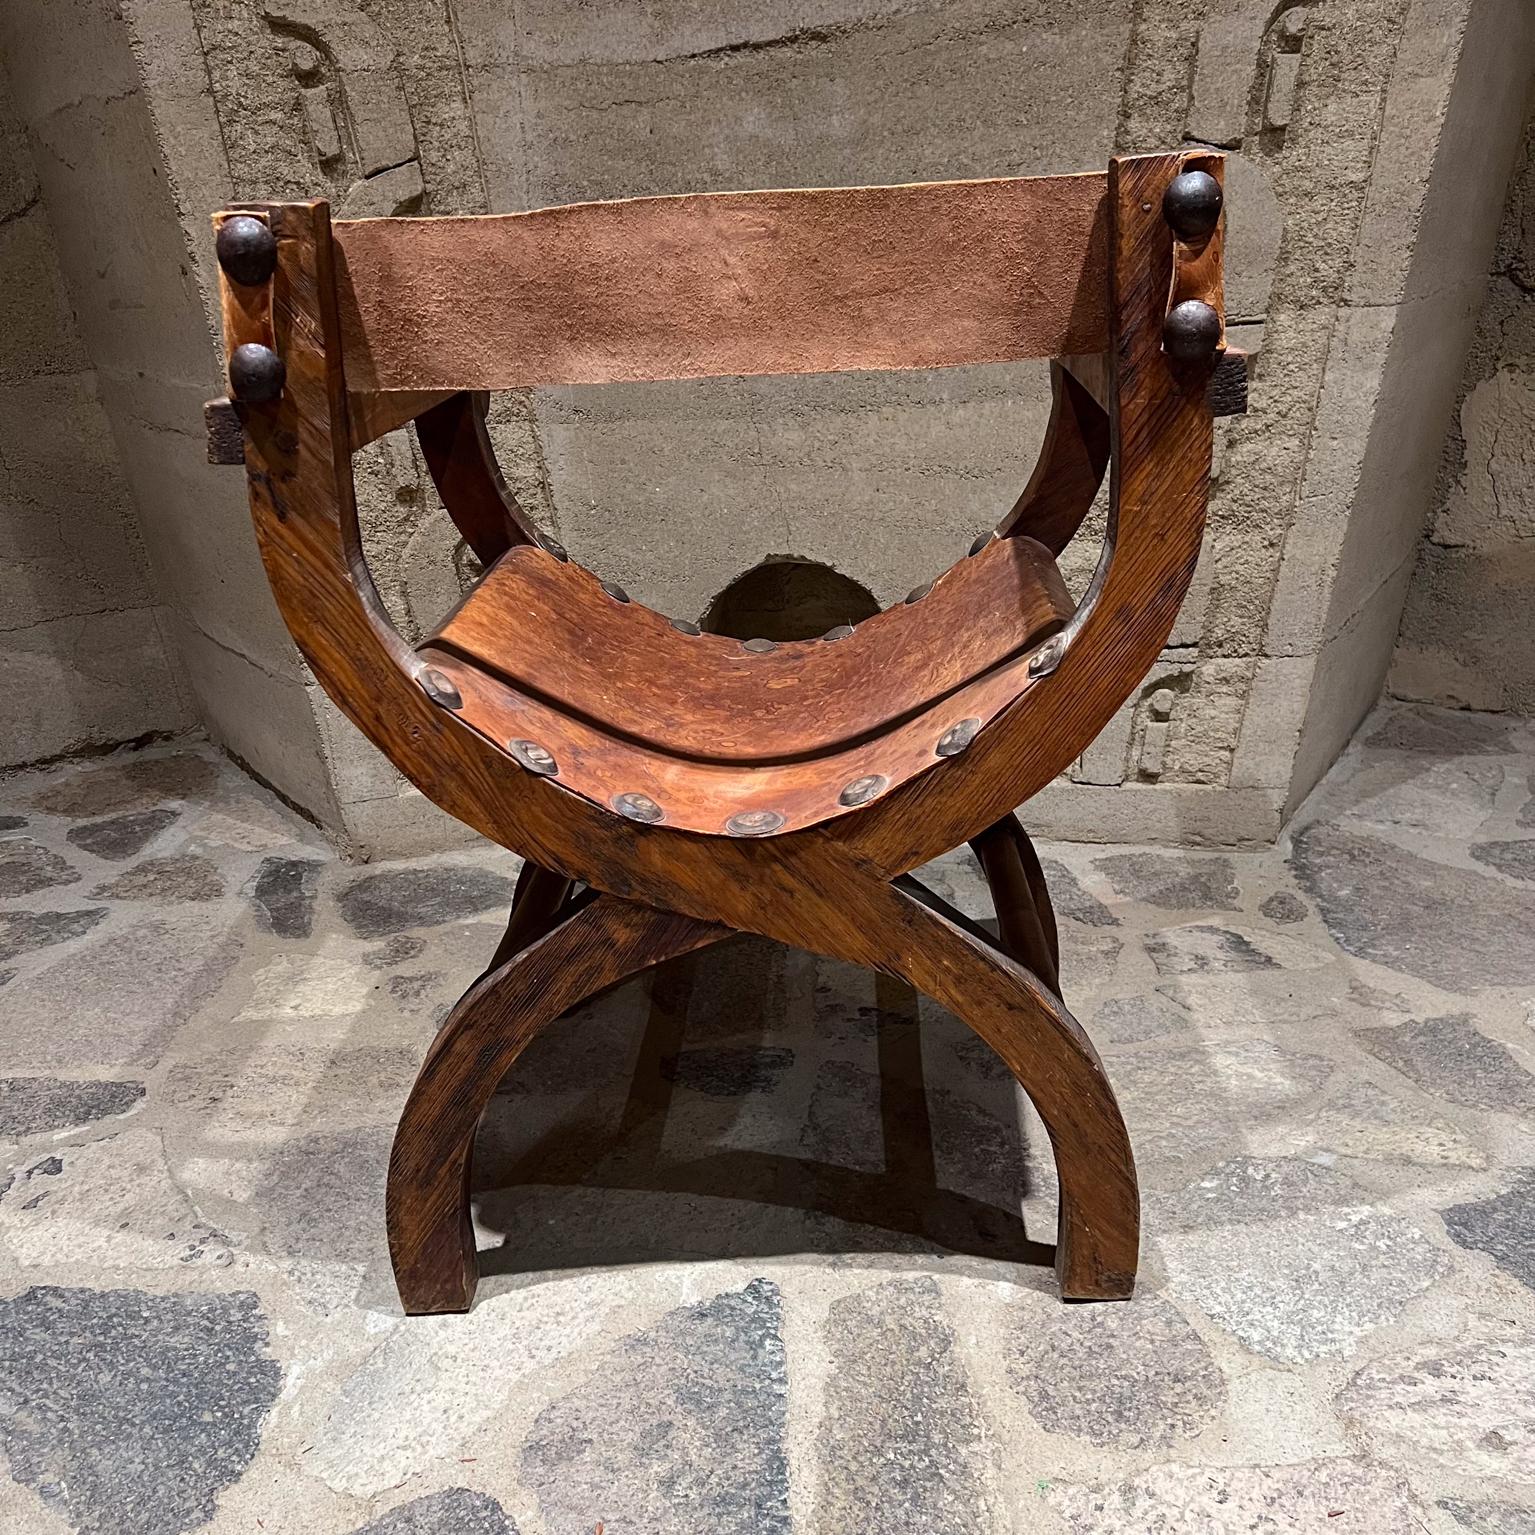 Mid-20th Century 1940s Mexican Leather Colonial Wood Chair Miguelito Butaque For Sale